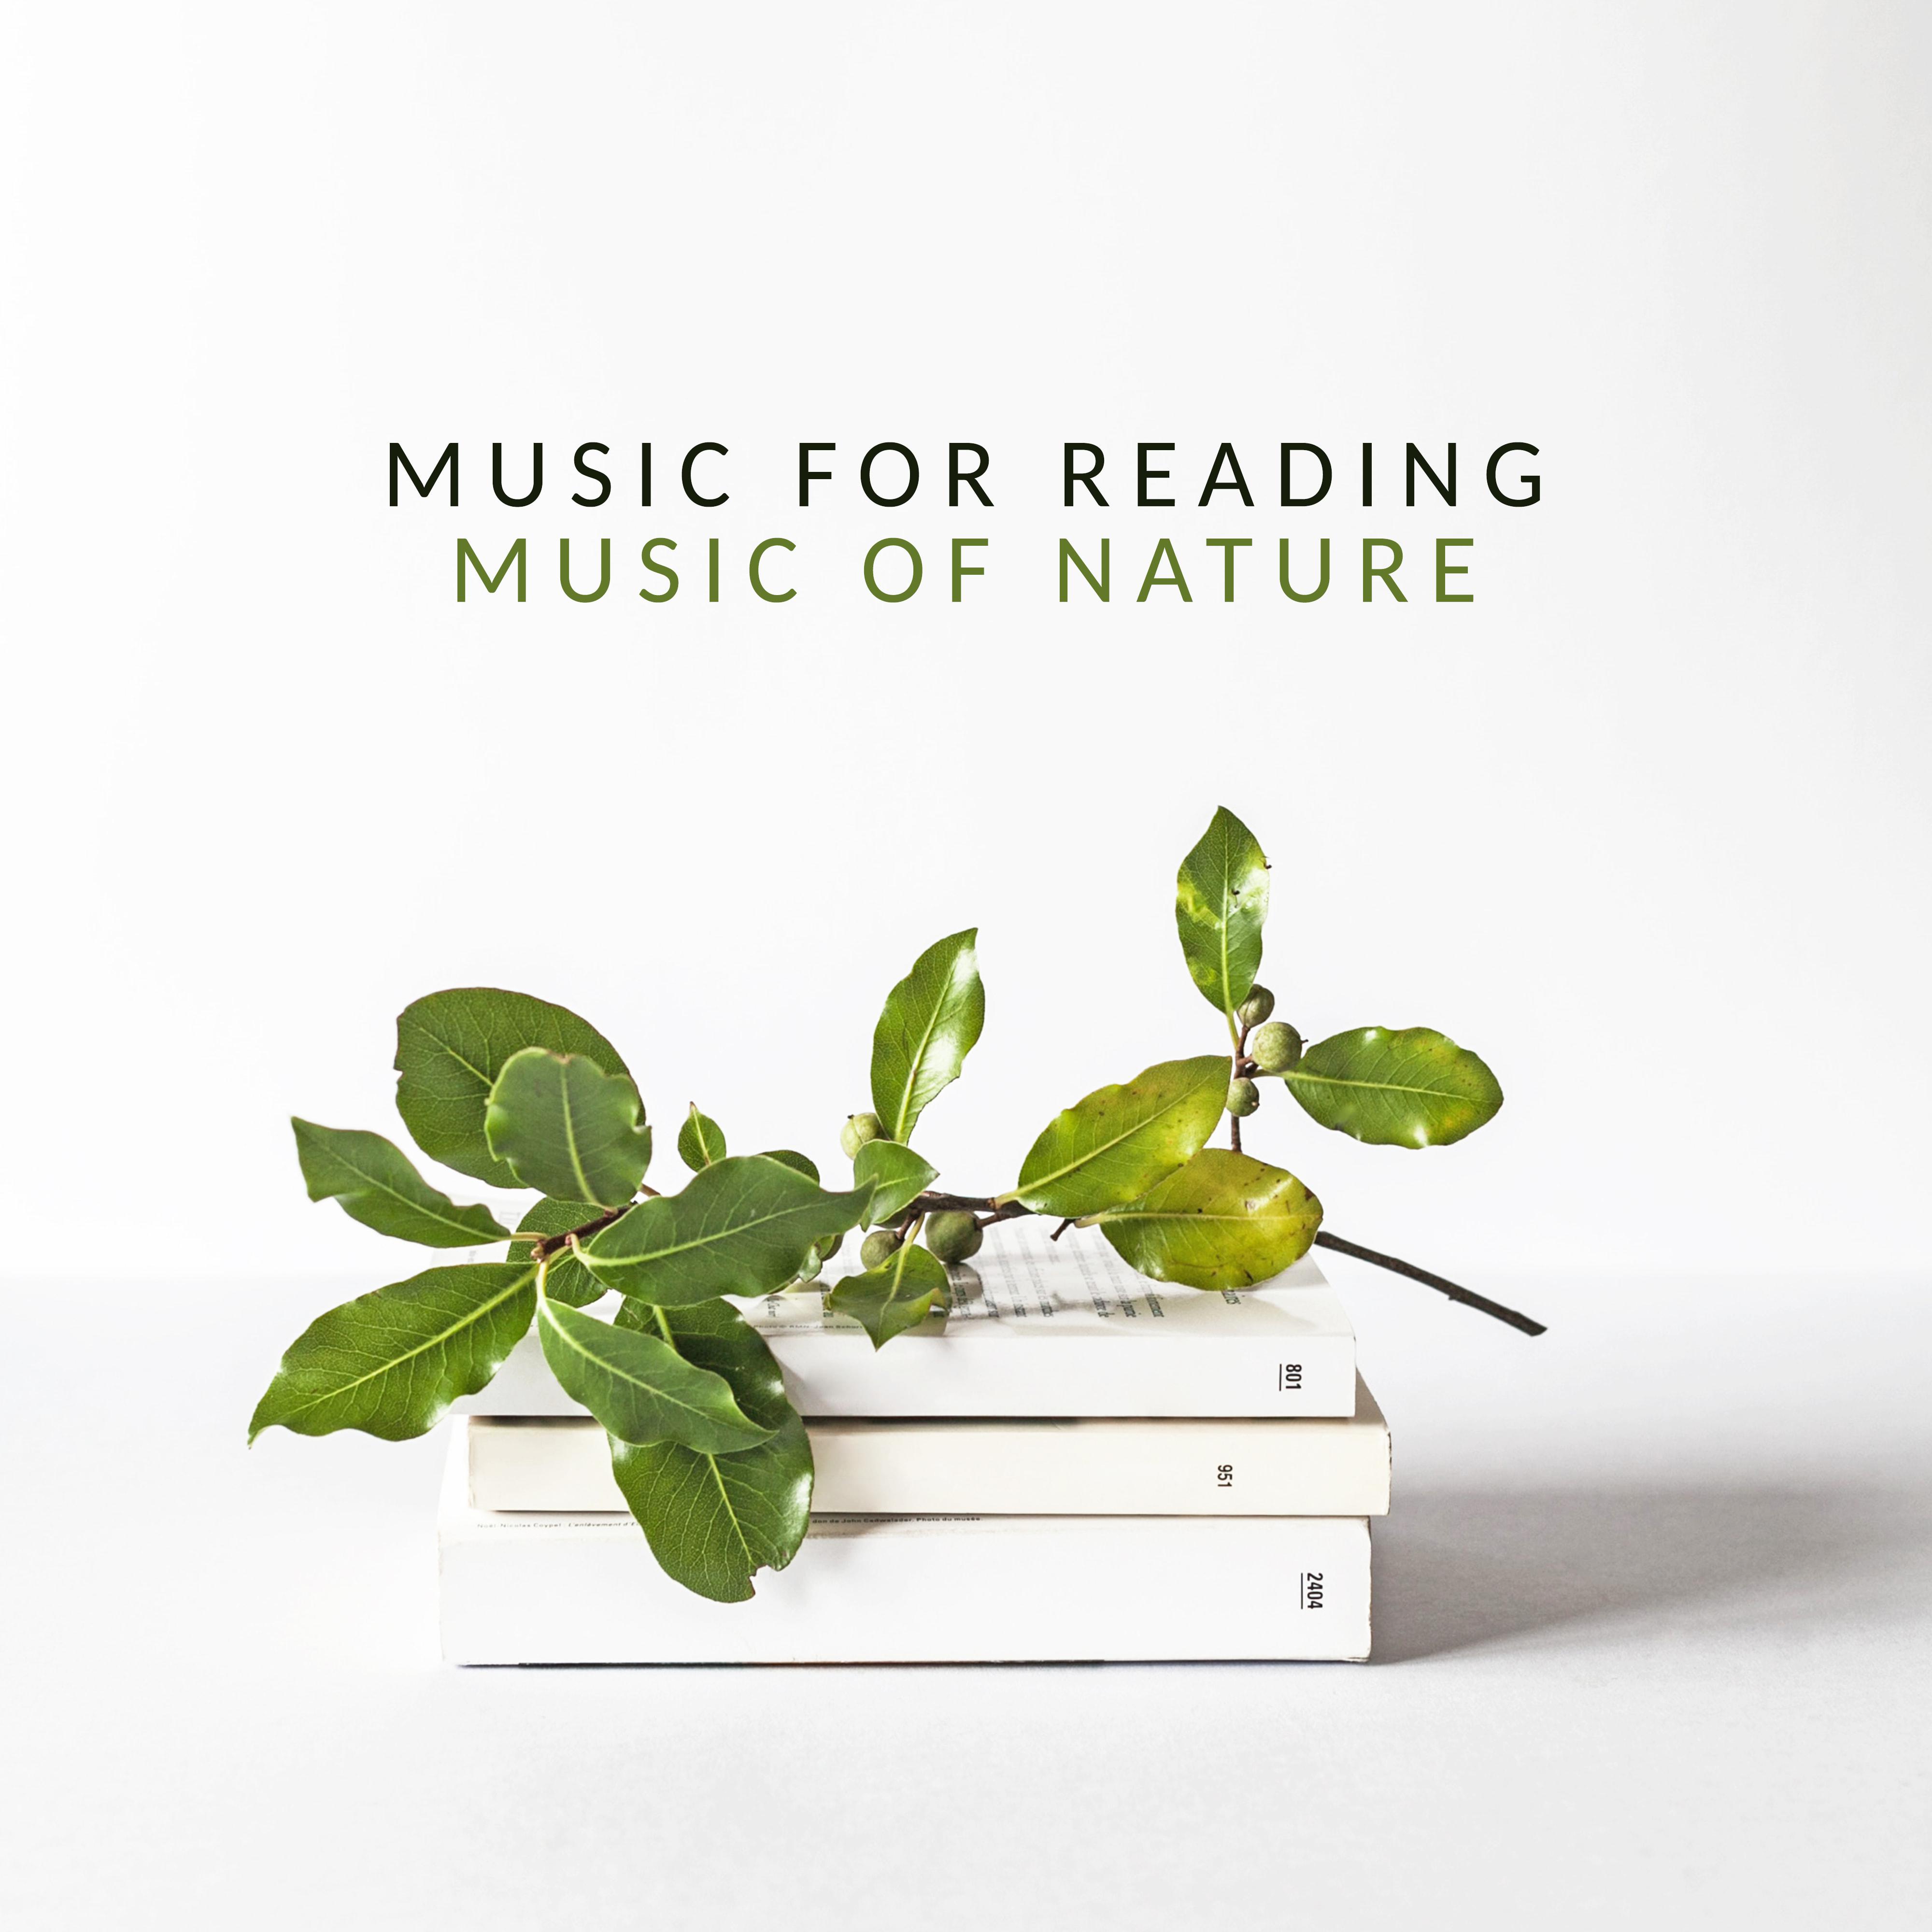 Music for Reading: Music of Nature